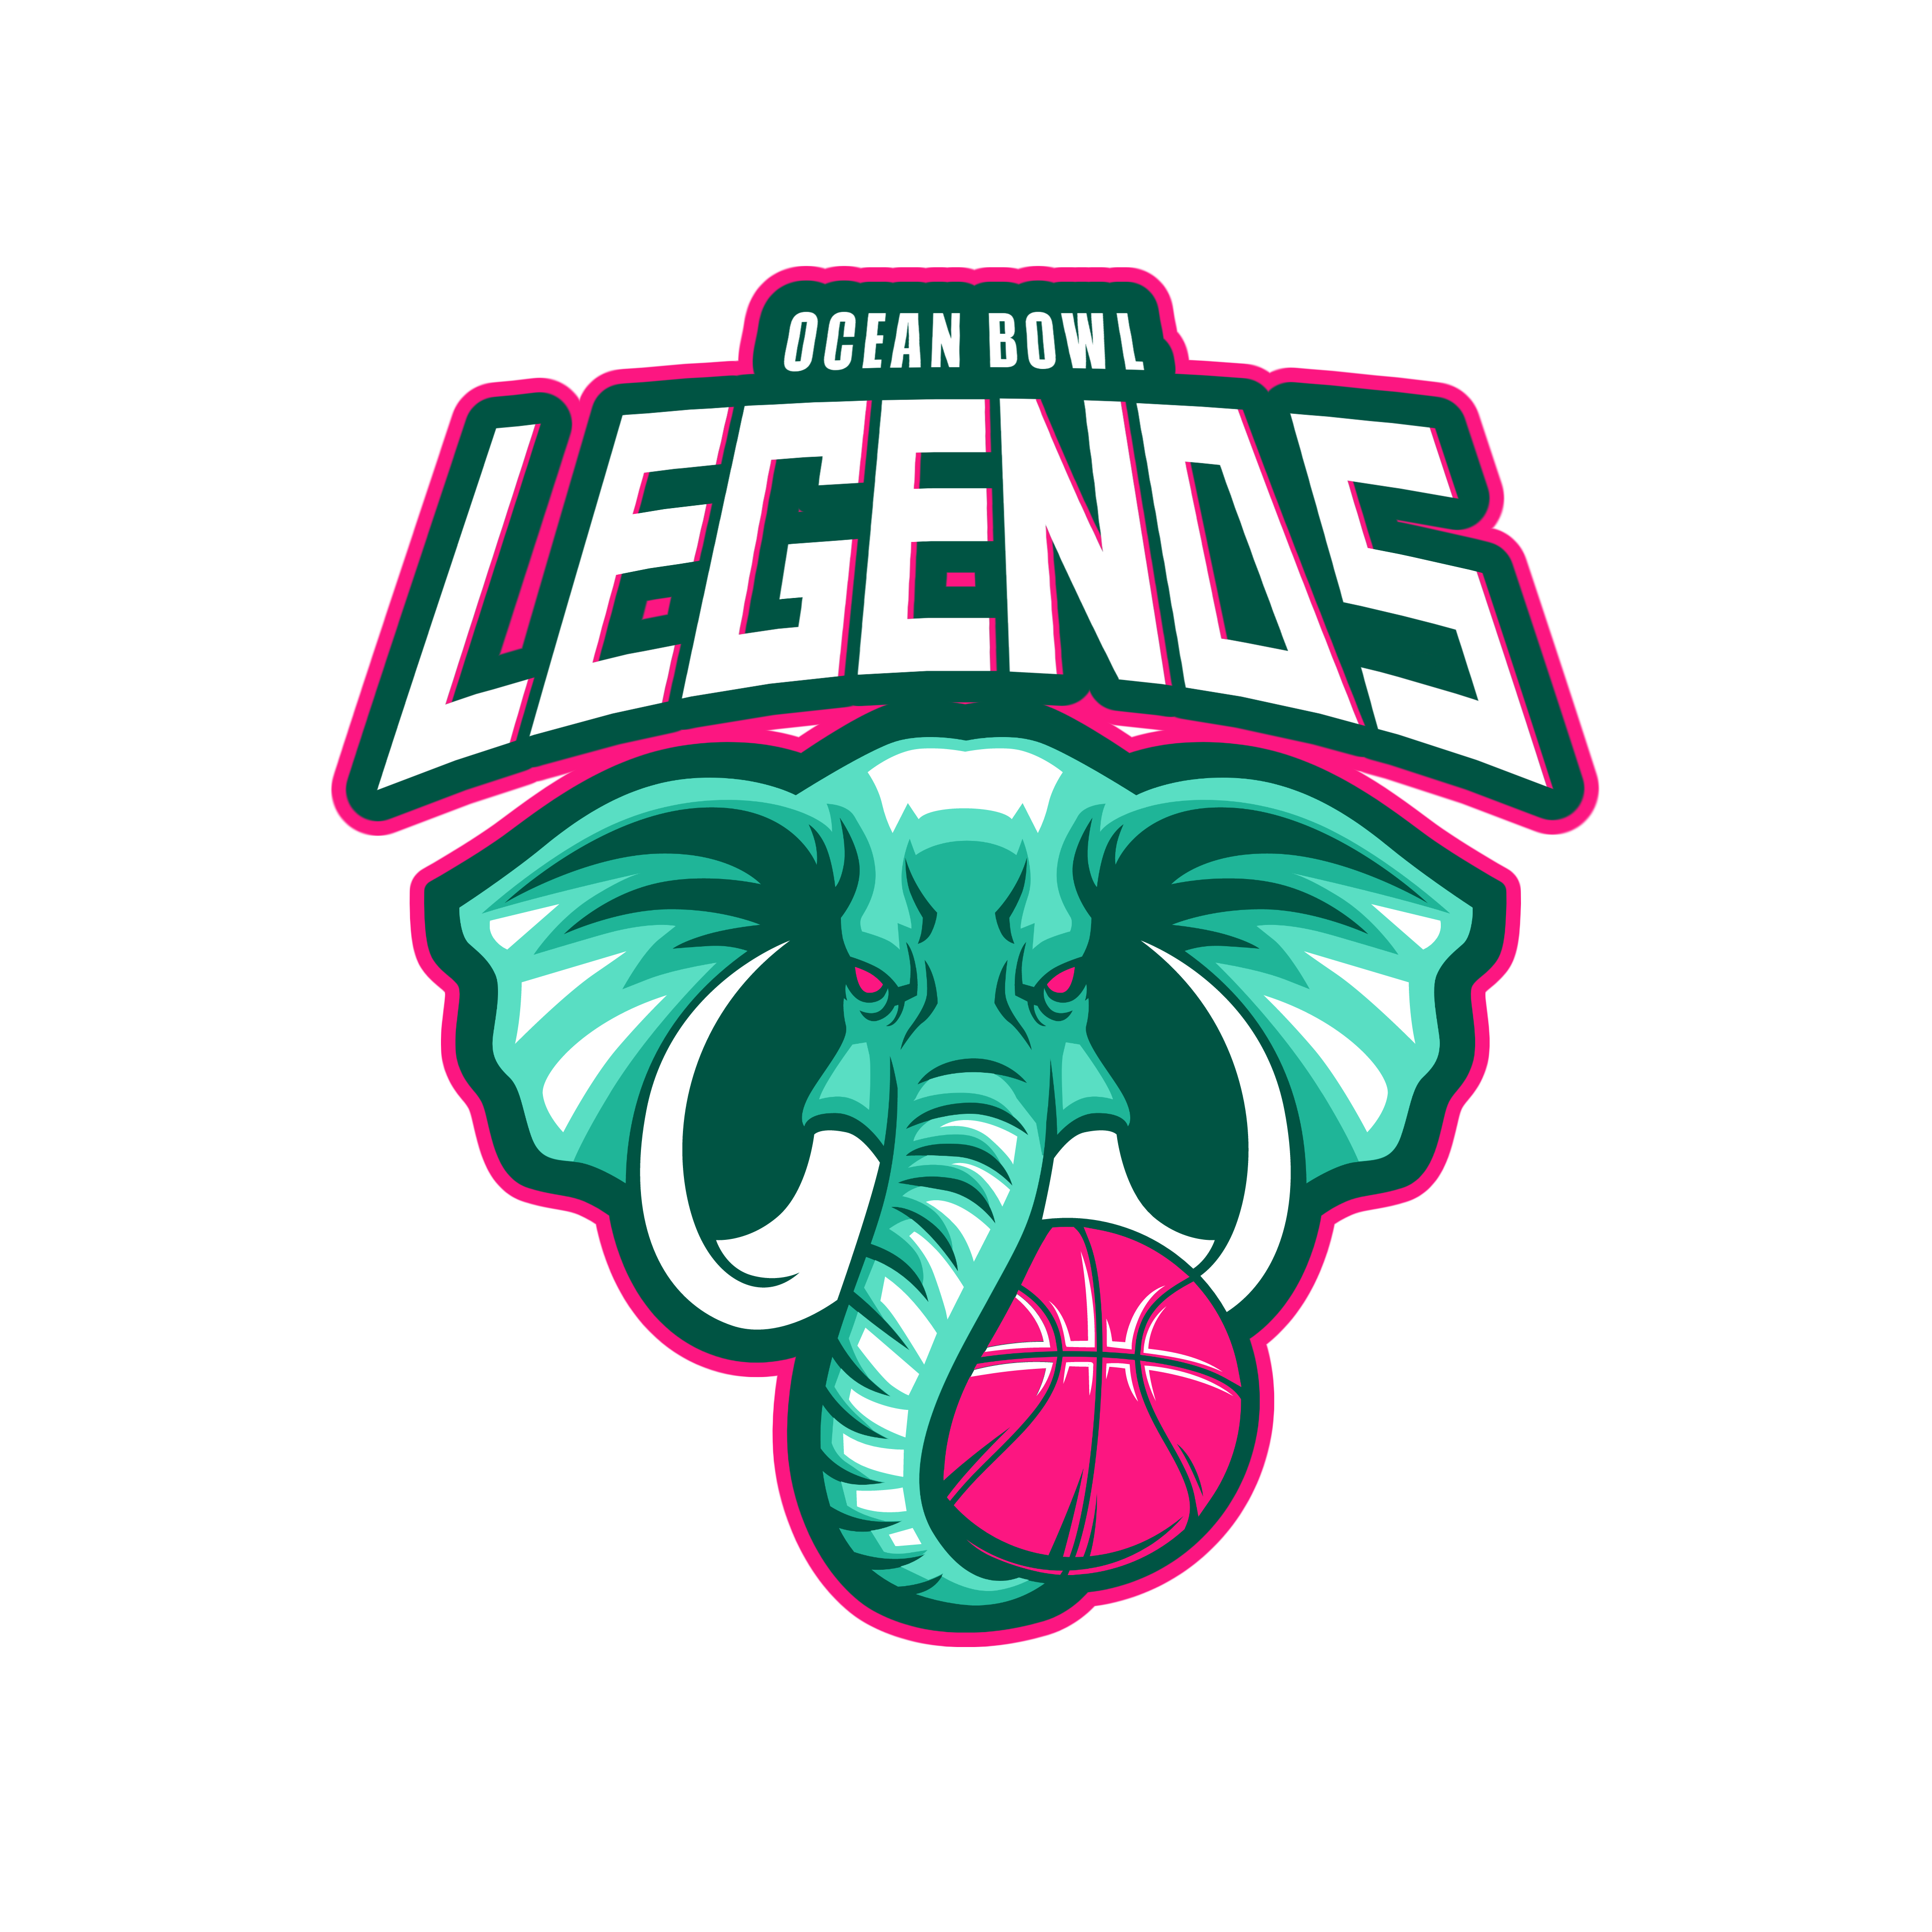 Team Day of Giving Legends's logo